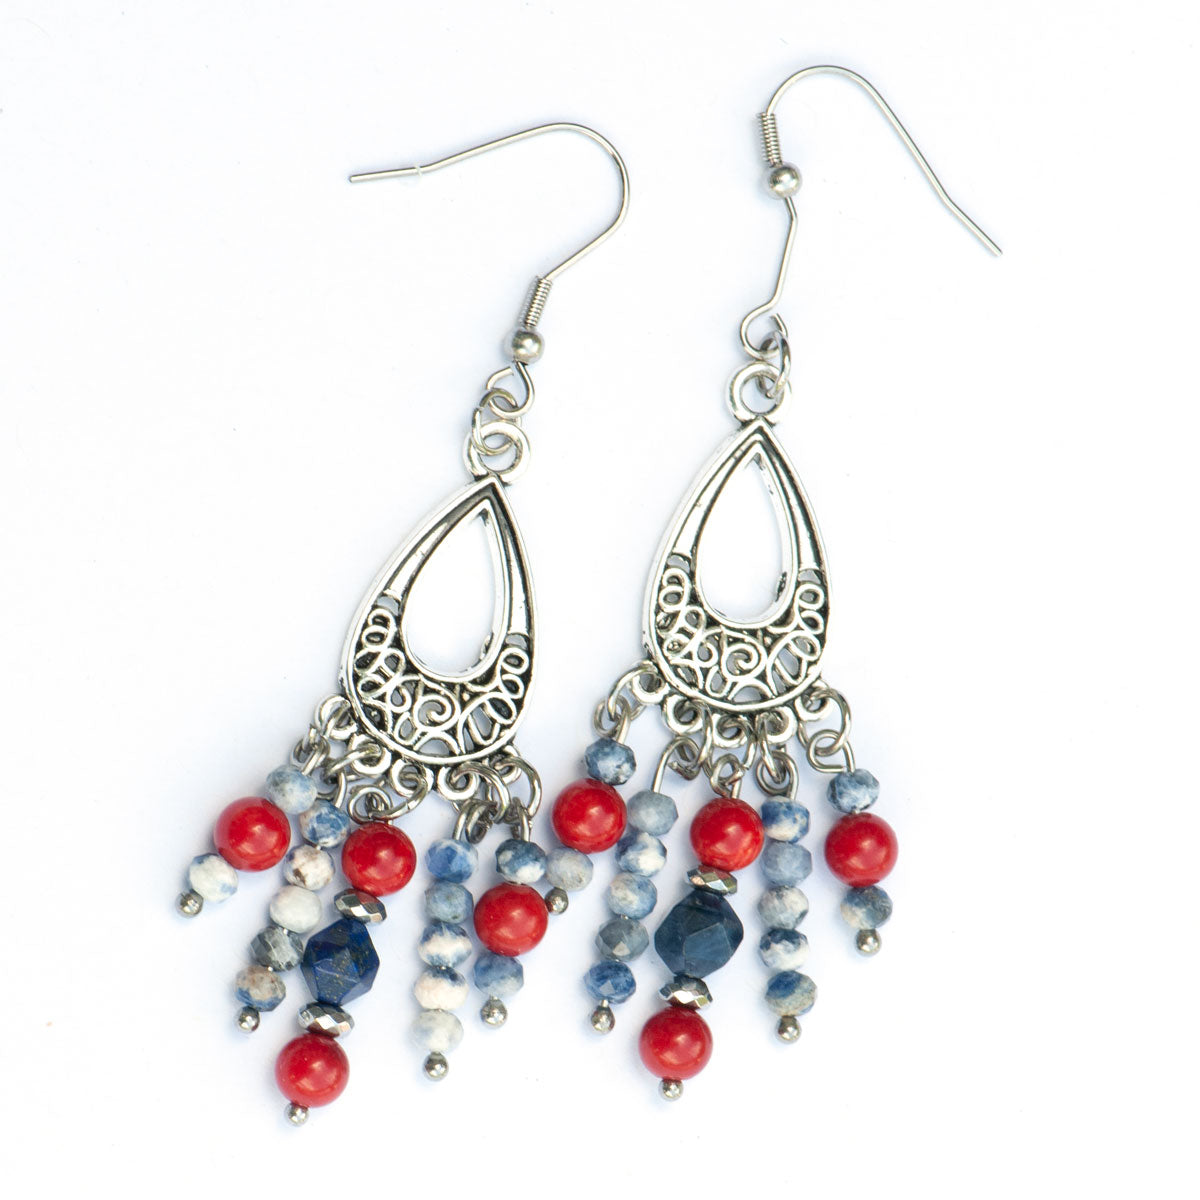 Chandelier earrings in red white and blue handmade in Canada